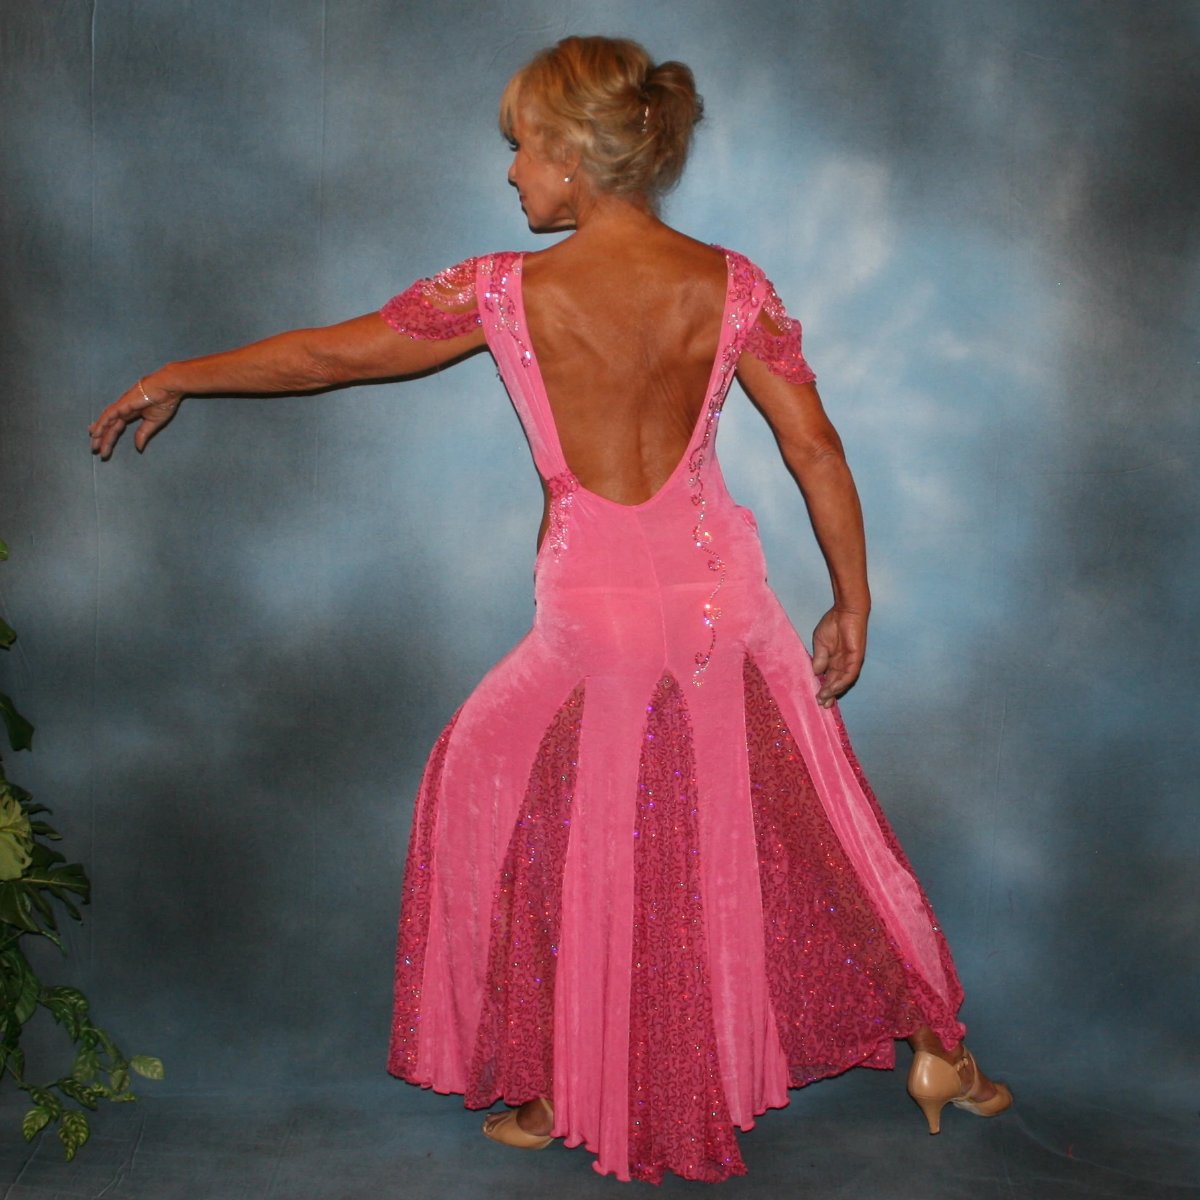 Crystal's Creations back view of Pink ballroom dress was created of luxurious bubble gum pink solid slinky with yards & yards of delicate deep pink sequin insets & is embellished with CAB & rose Swarovski detailed rhinestone work